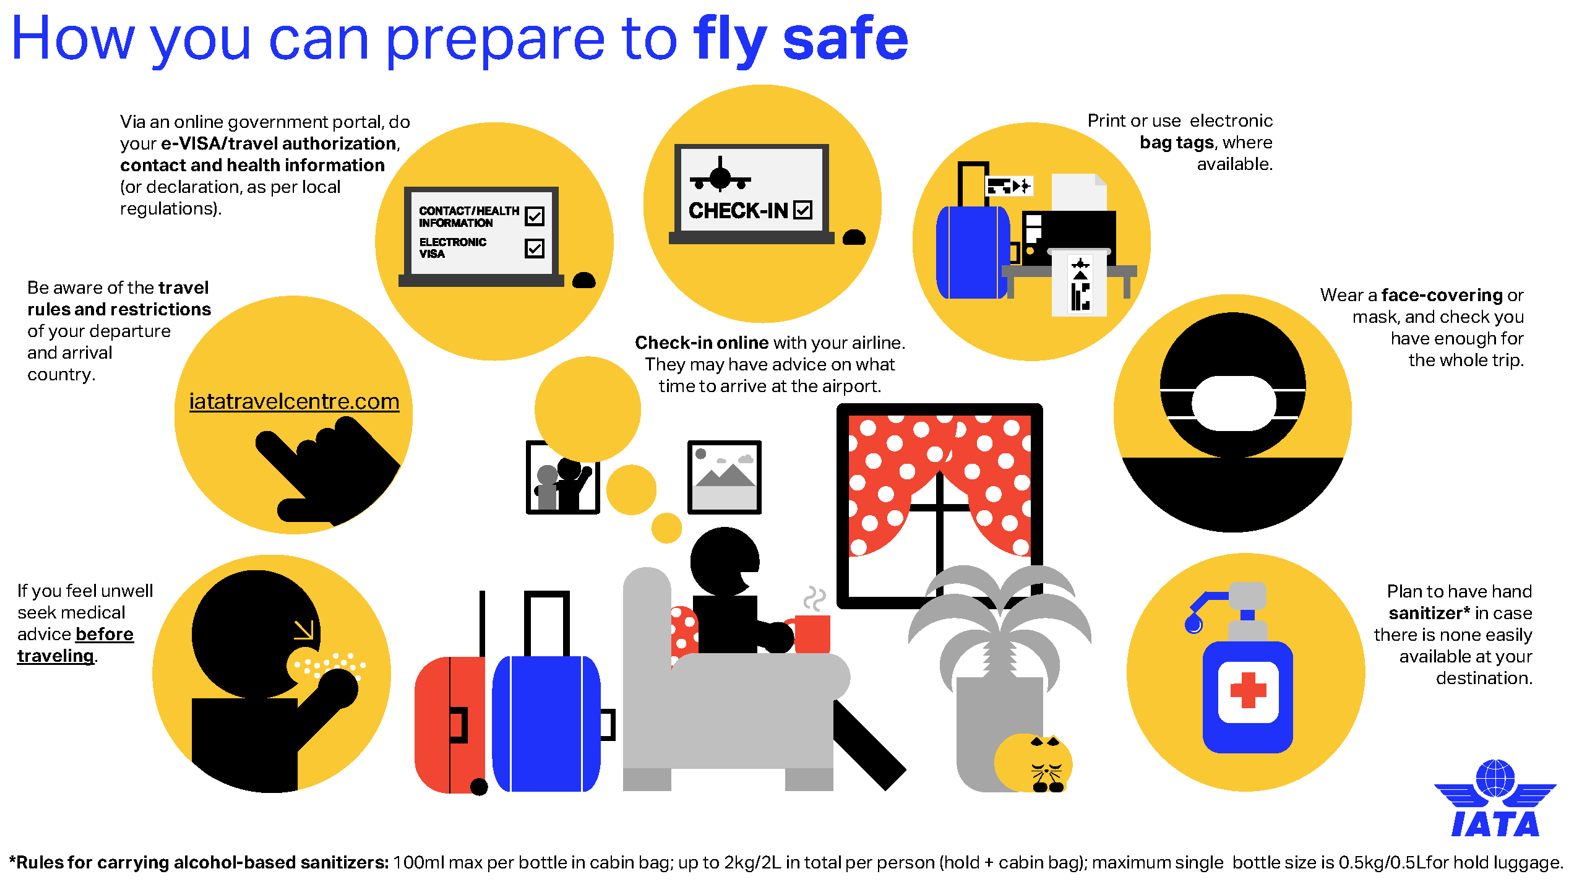 How you can prepare to fly safe